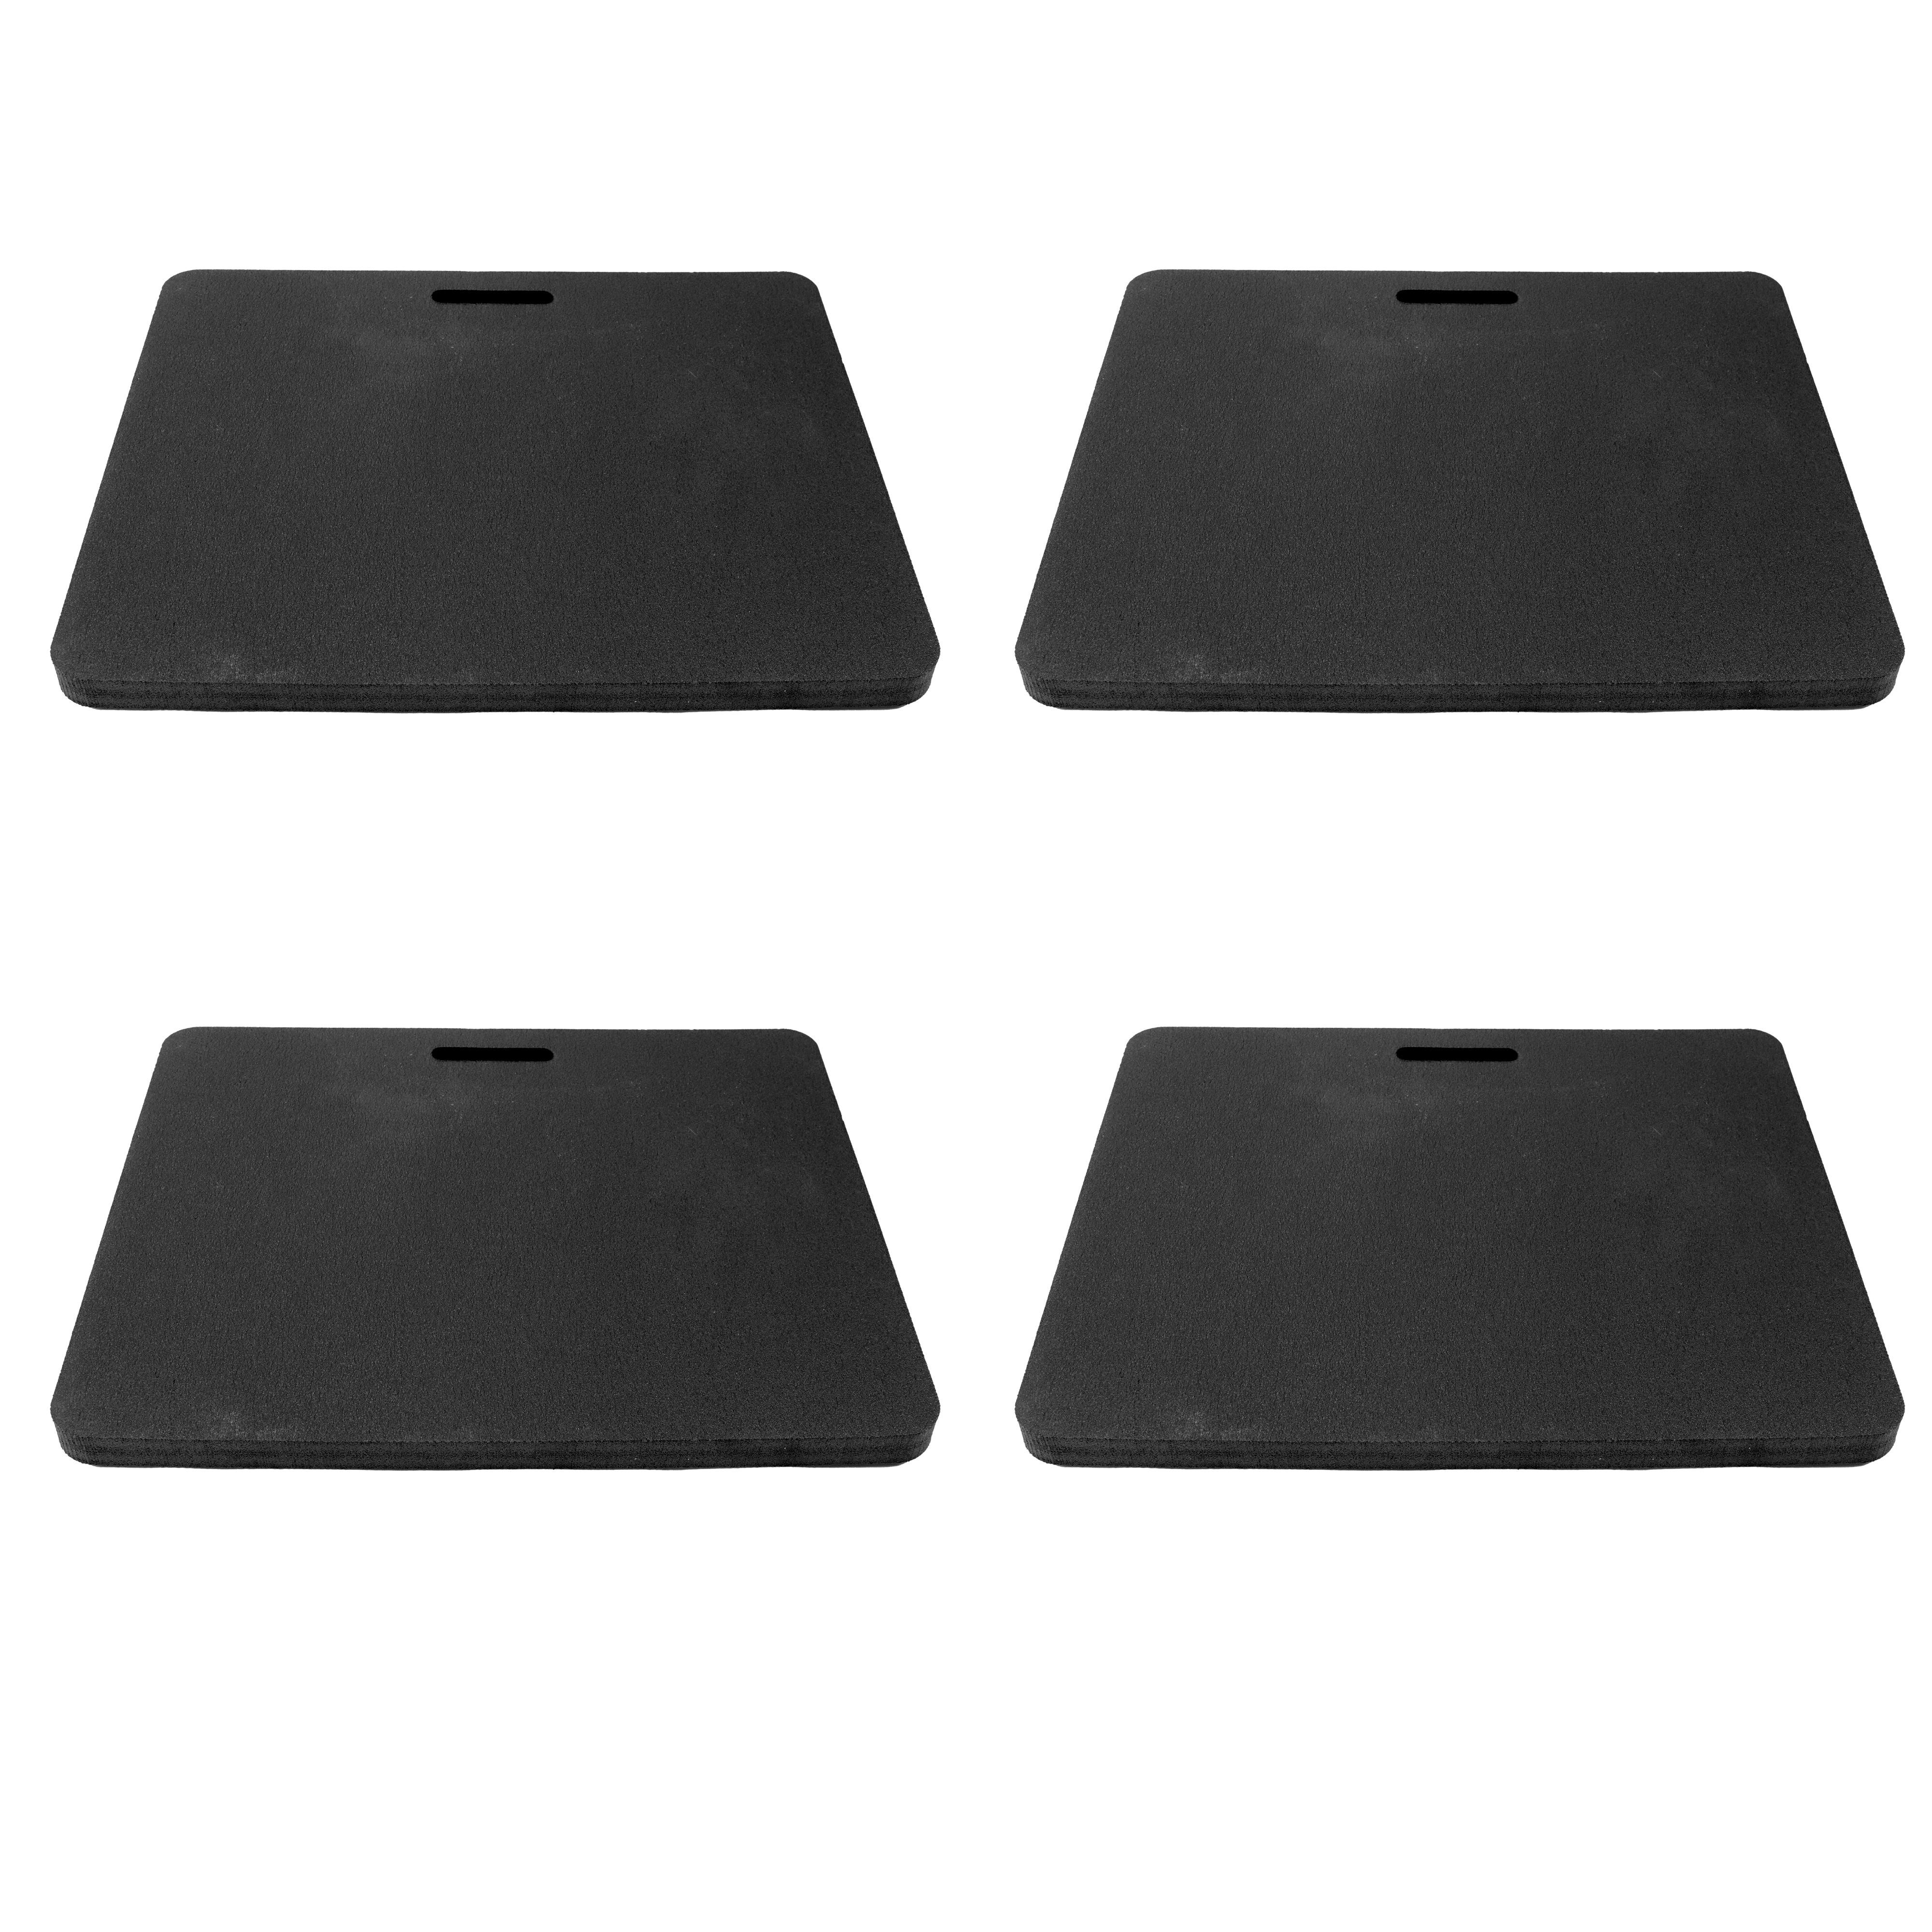 4 Portable Knee Cushions for Home Garden Work Automotive Workshop and More Durable Thick Comfortable High Density Waterproof Black Foam 20 x 16 Inches Kneeling Pad